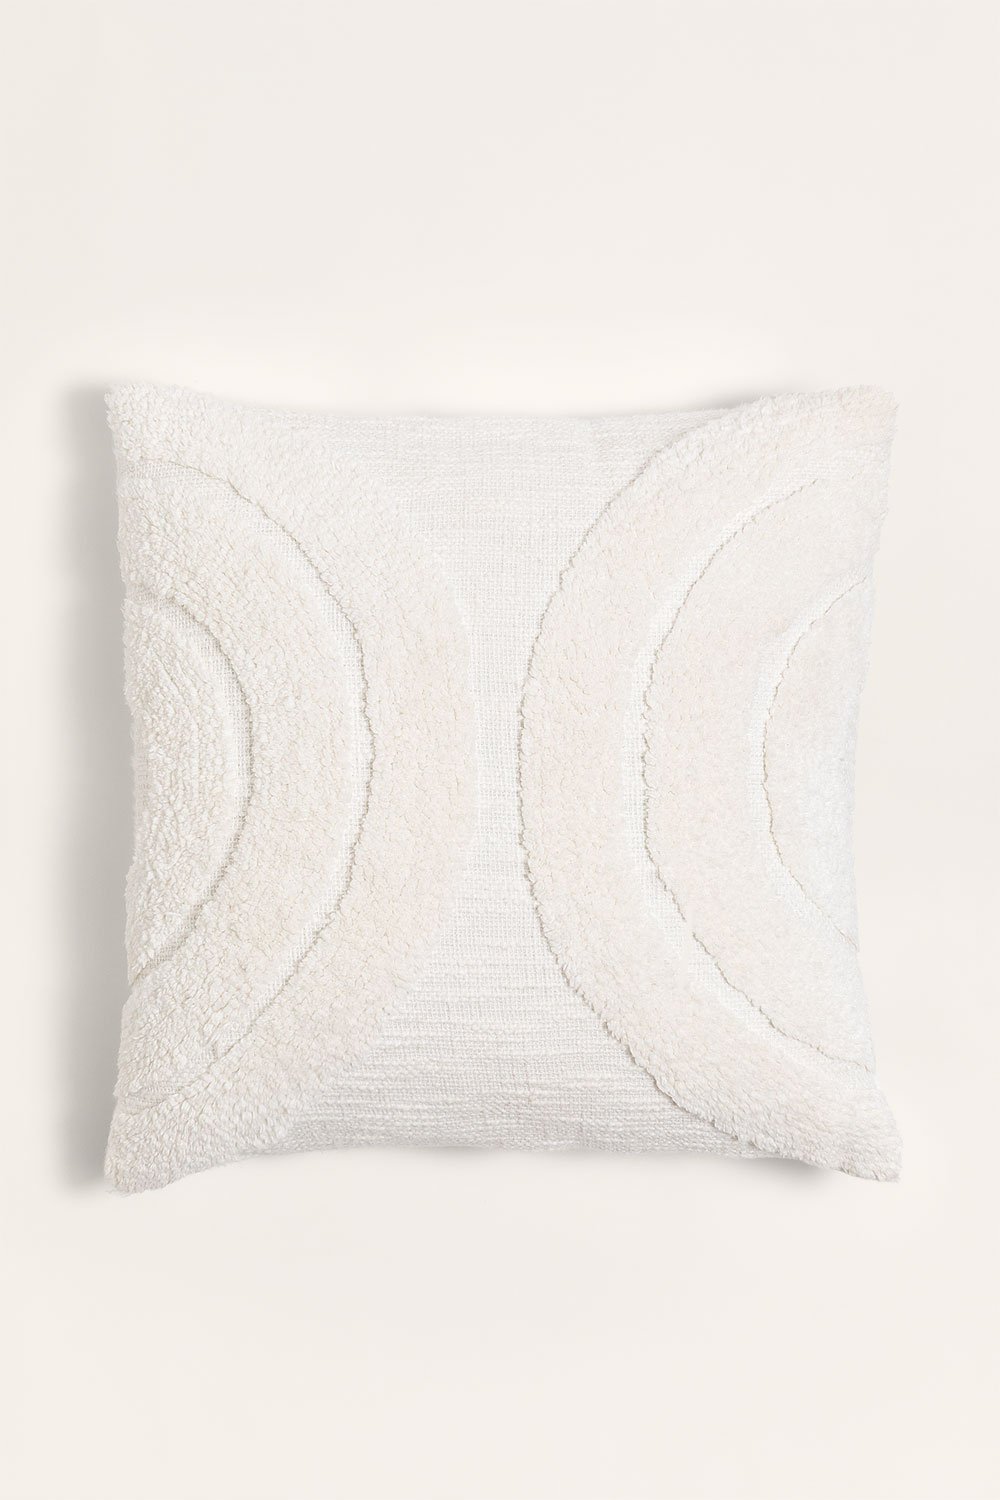 Square Cotton Cushion (45 x 45 cm) Zaylee, gallery image 1